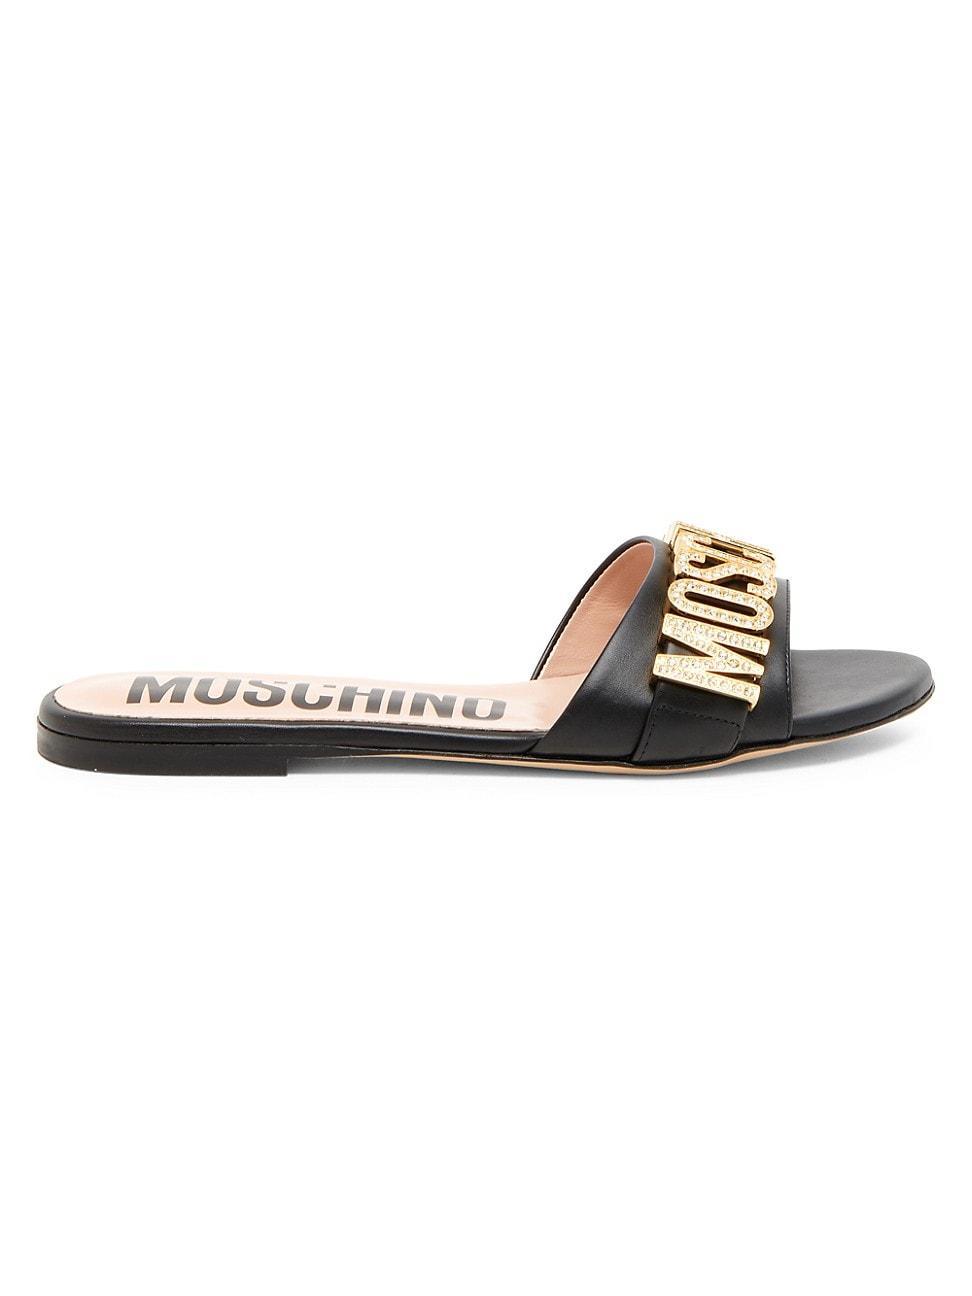 Womens Crystal Logo Leather Slide Sandals Product Image